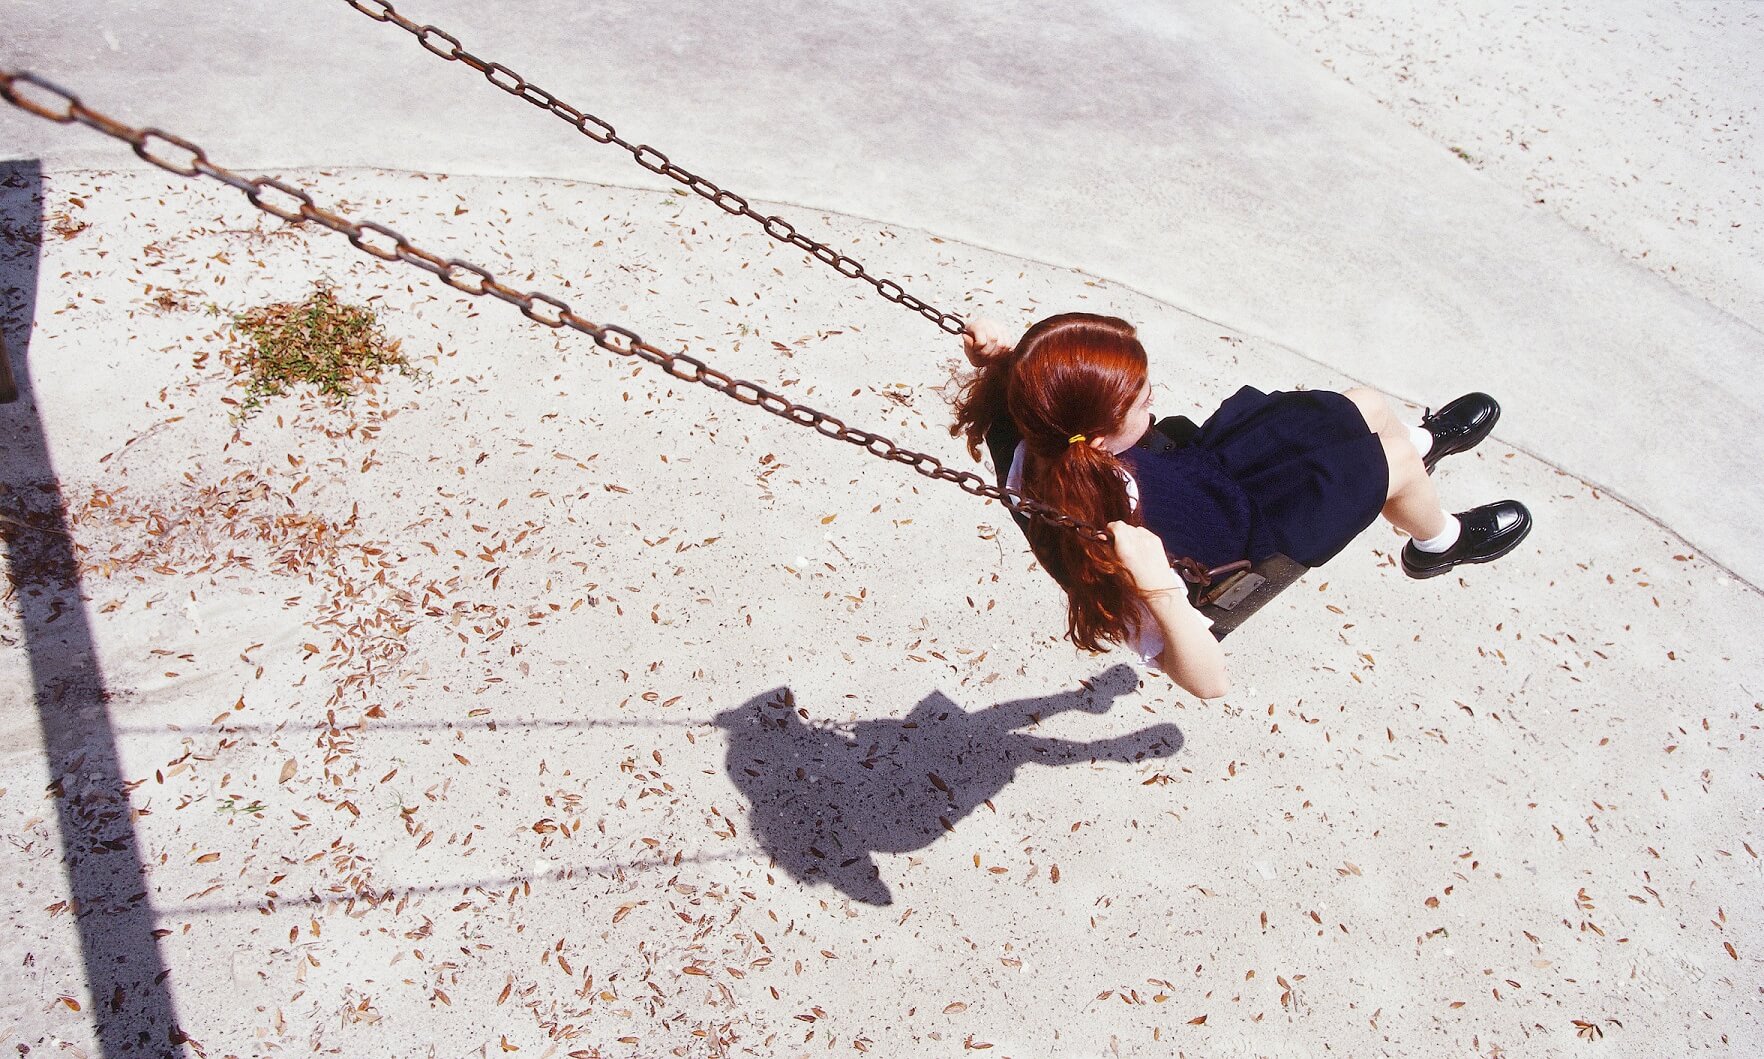 A child plays on a swing alone